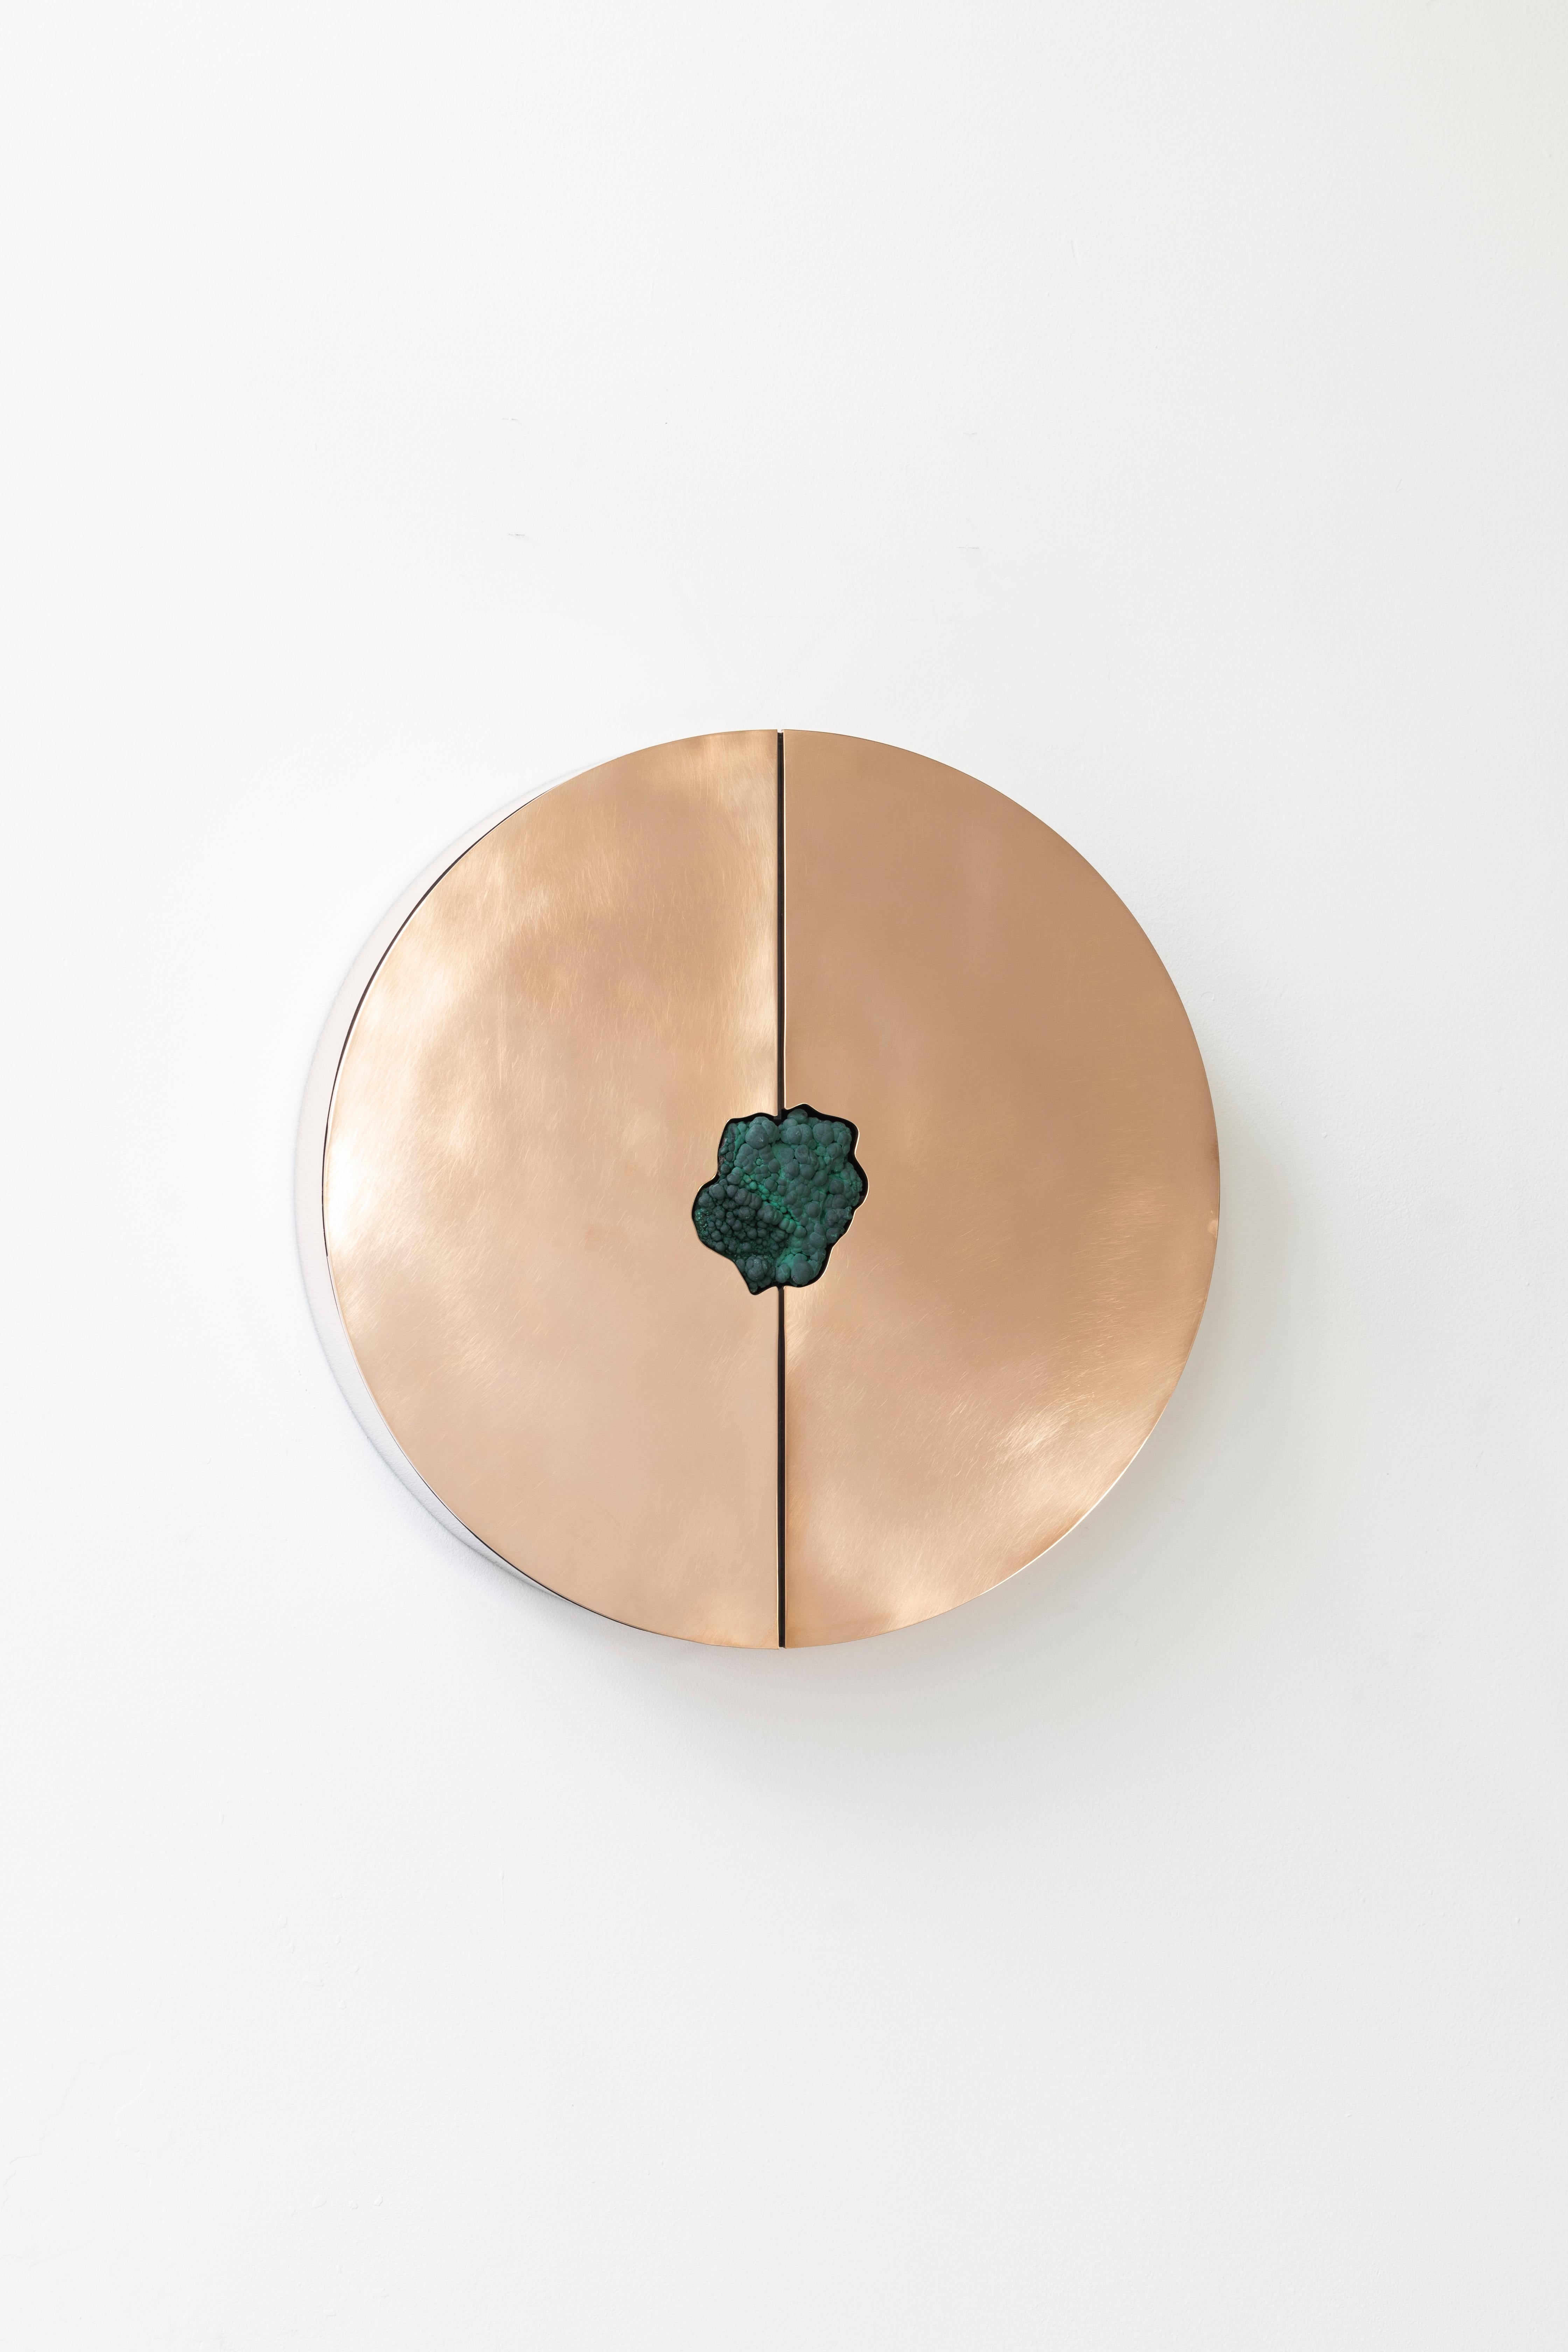 Wall cabinet with Malachite by Pierre De Valck.
Dimensions: W 90 x D 22 x H 90cm
Materials: Polished bronze with Malachite.
Weight: 45 kg.
Each piece is unique.

Pierre De Valck (1991) born in Brussels, is a Ghent-based designer with a childhood